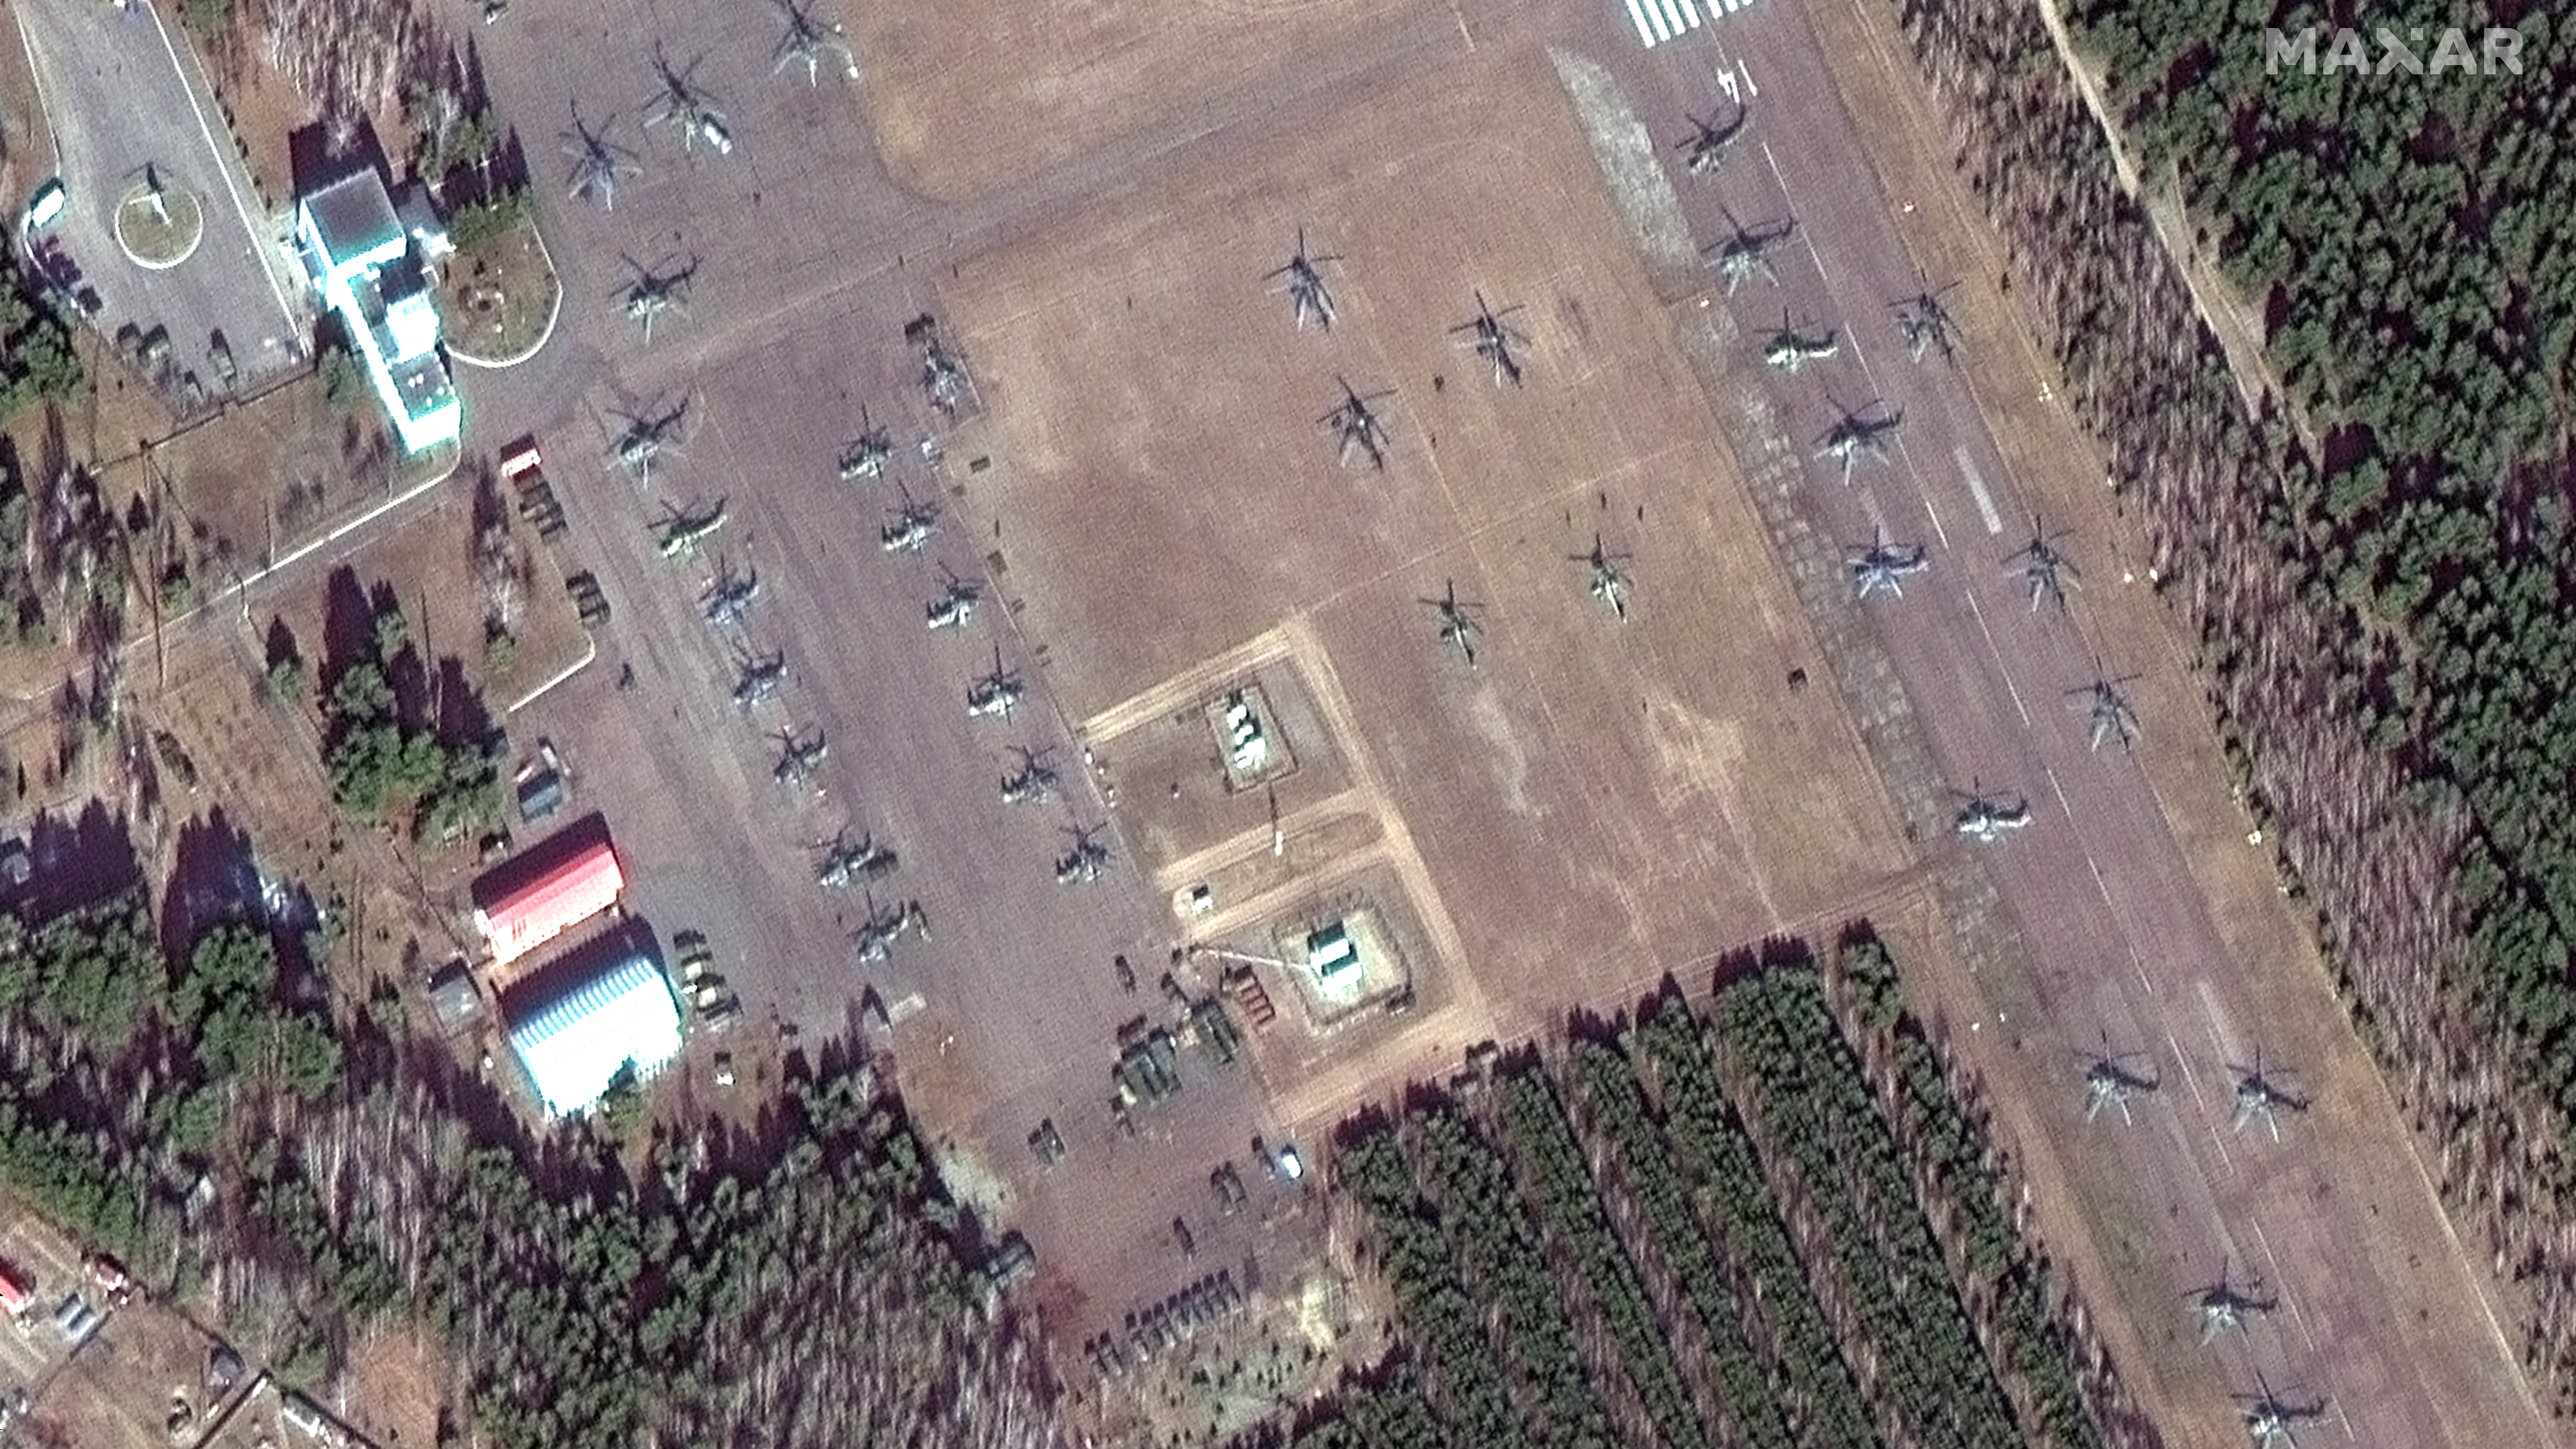 Attack helicopter at a military airport in Belarus near the border with Ukraine captured by Earth observation satellites.